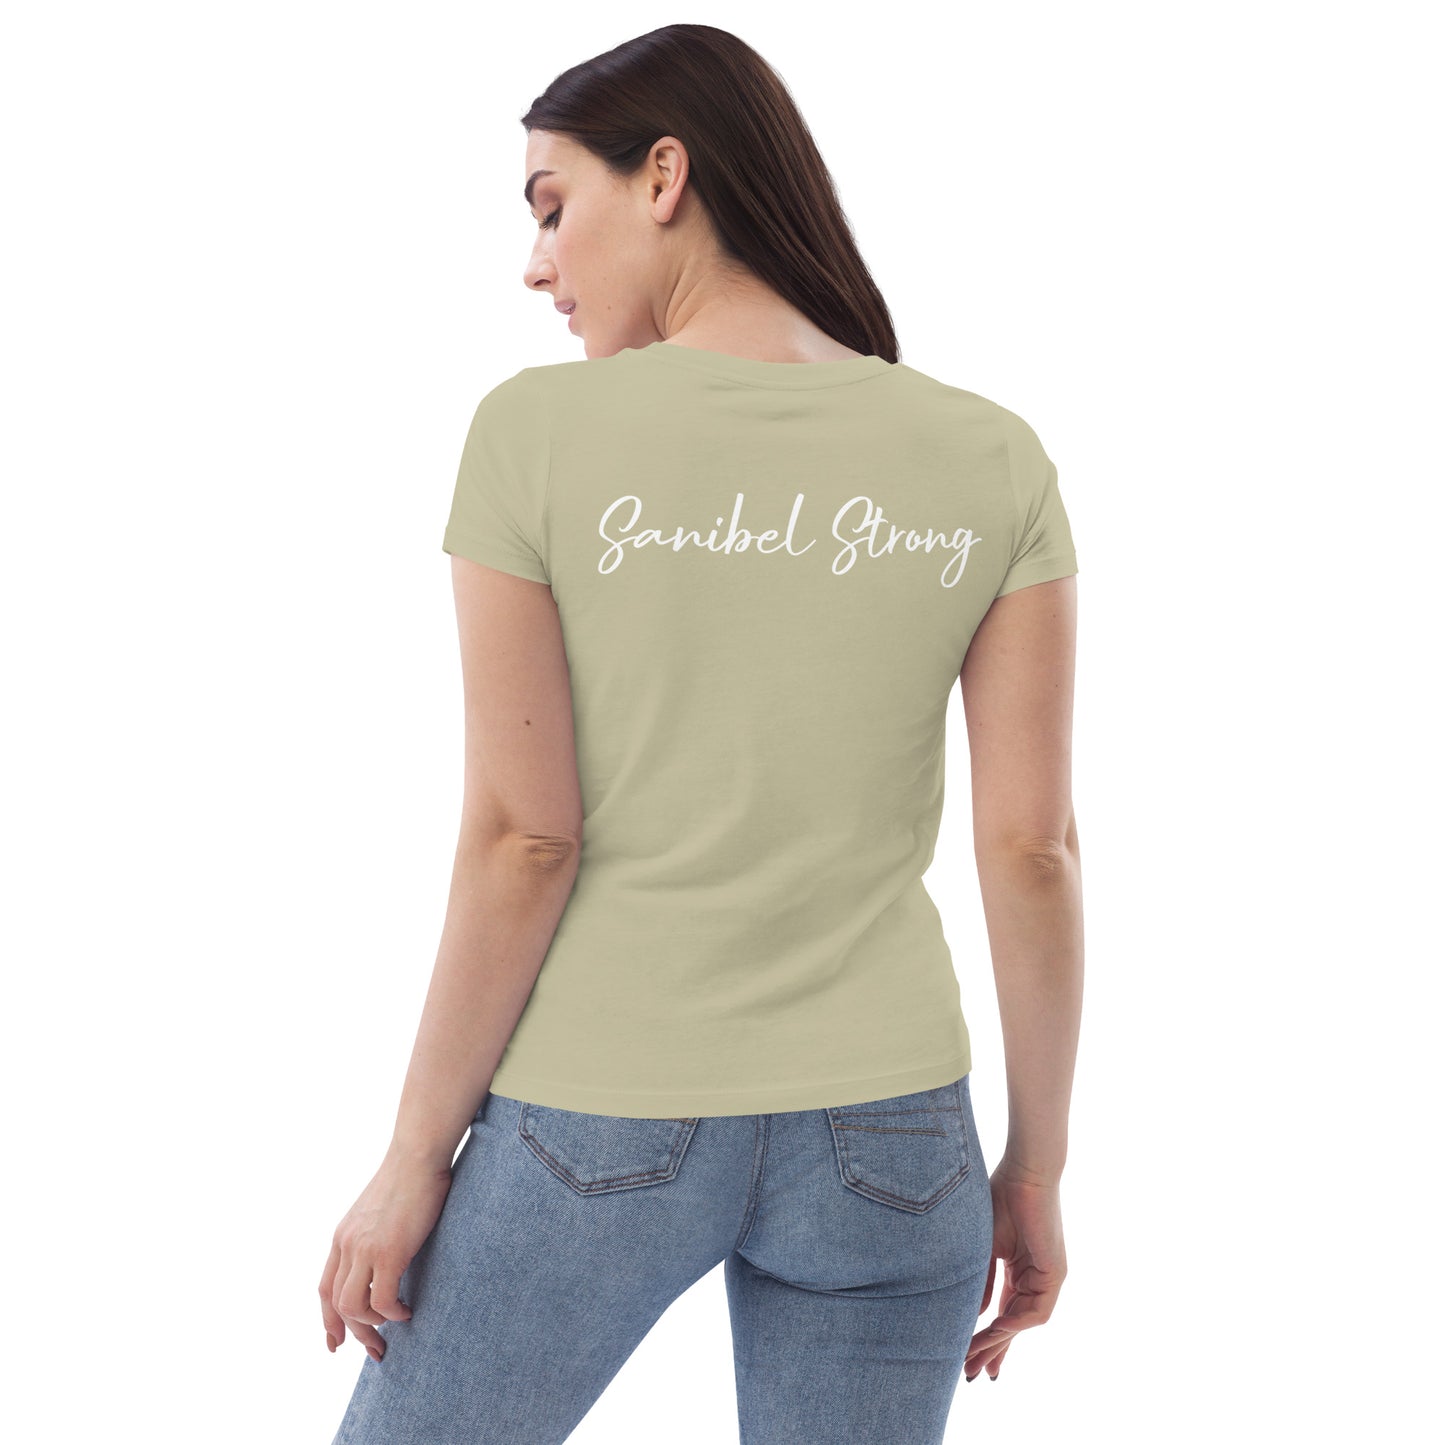 Sanibel Strong Women's Fitted Shirt (2 sided design)